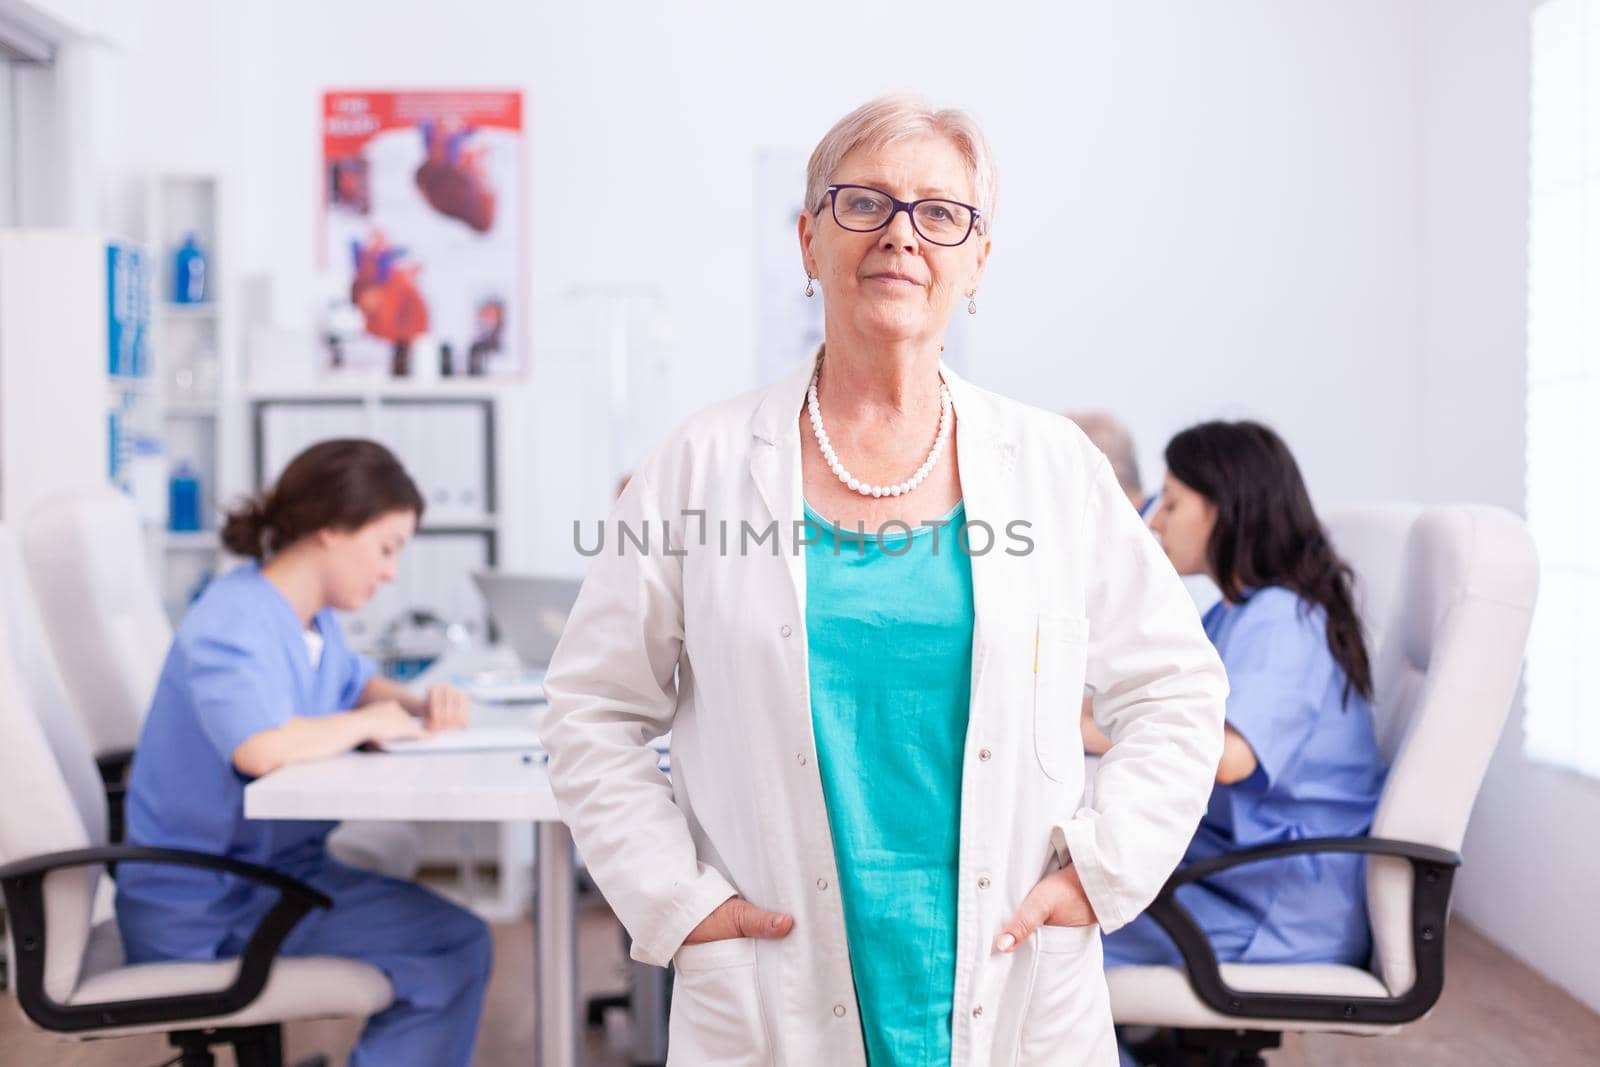 Portrait of senior doctor smiling at camera in hospital conference room with medical staff in the background.